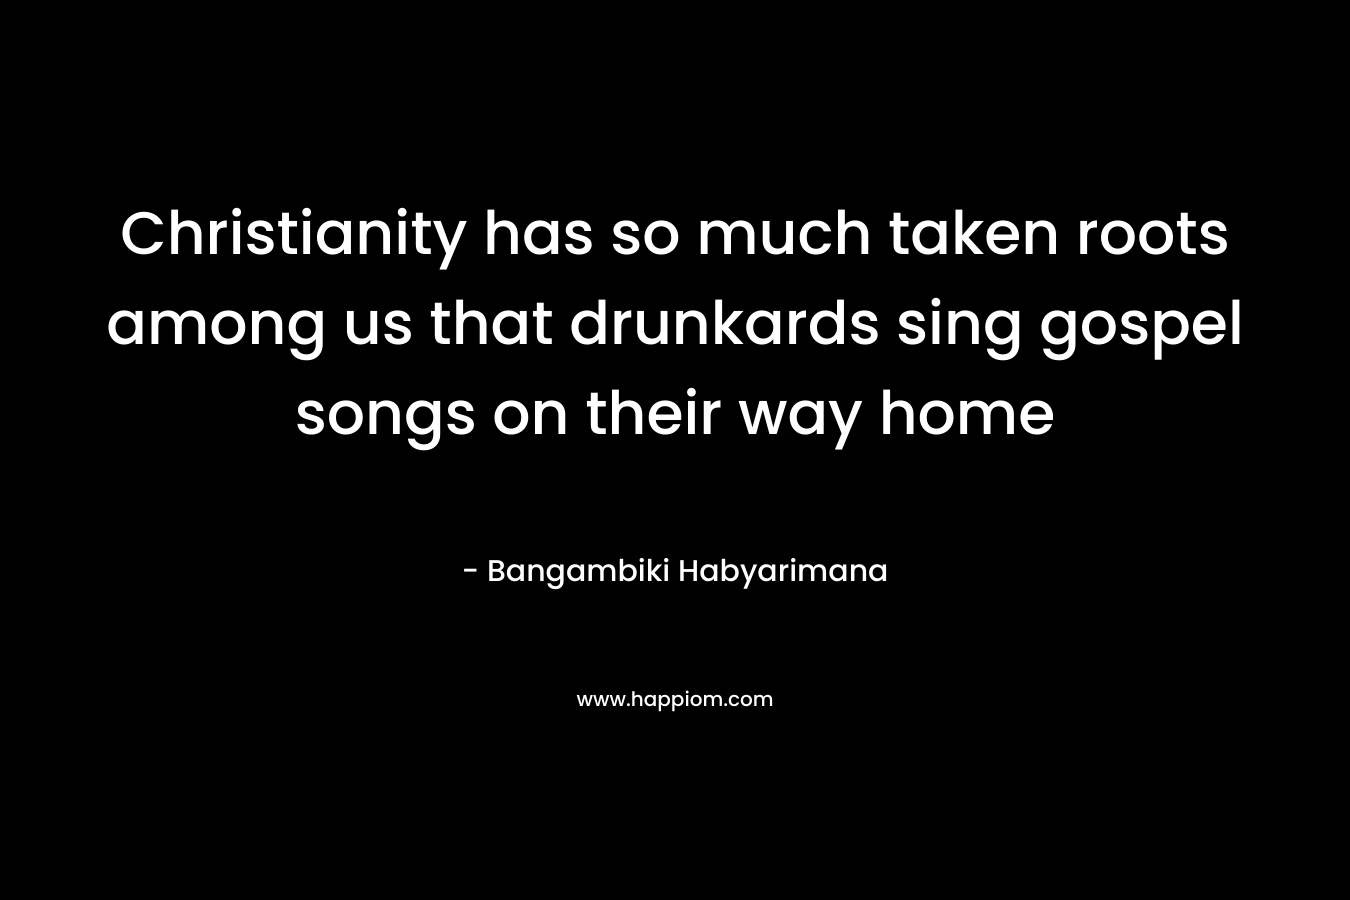 Christianity has so much taken roots among us that drunkards sing gospel songs on their way home